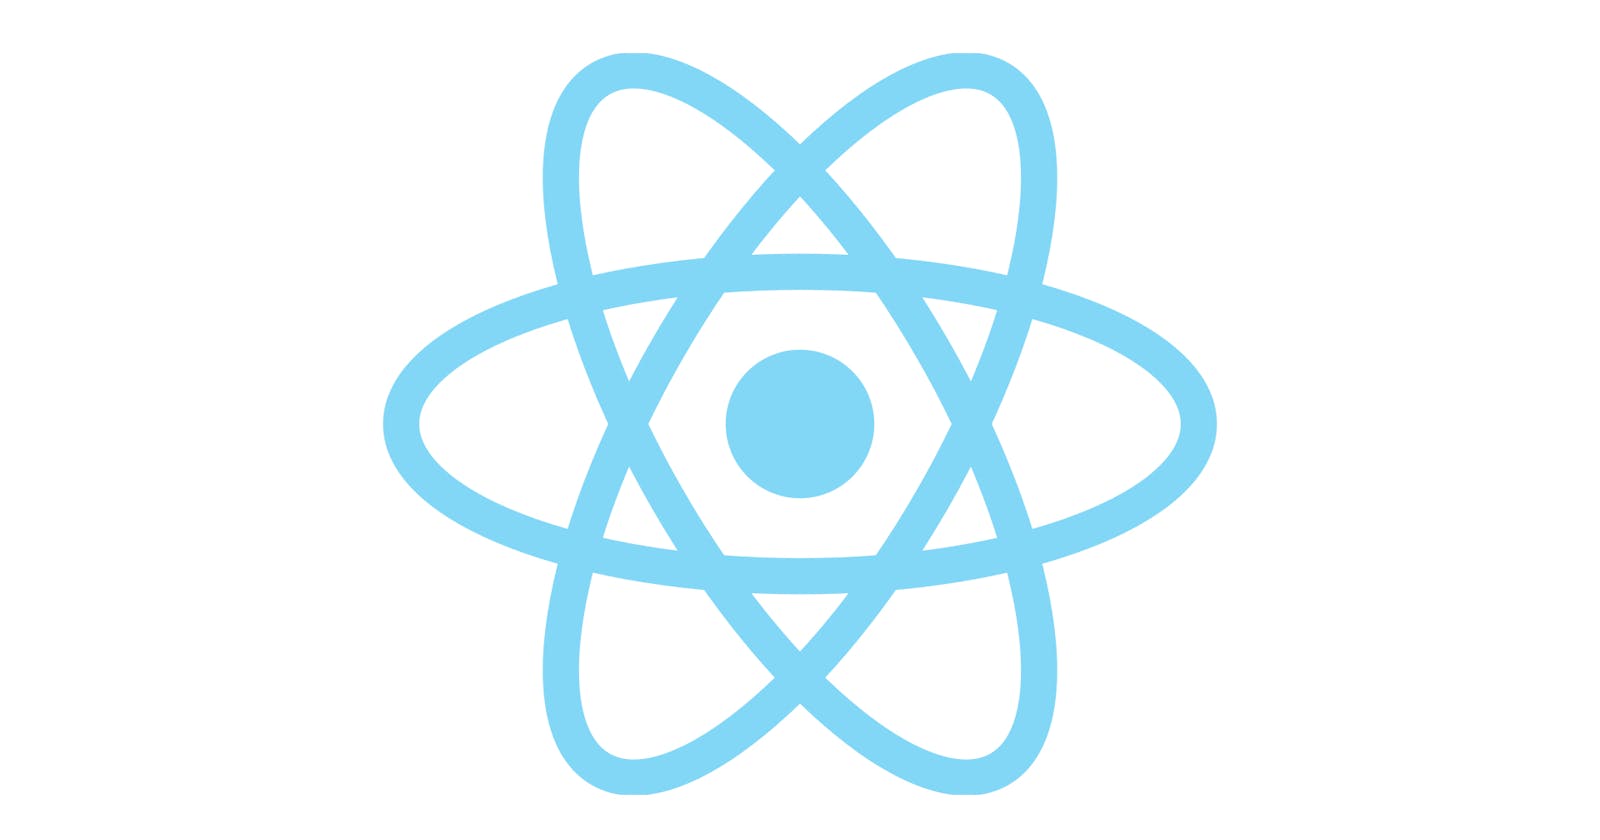 3 Strategies to Test Your React App